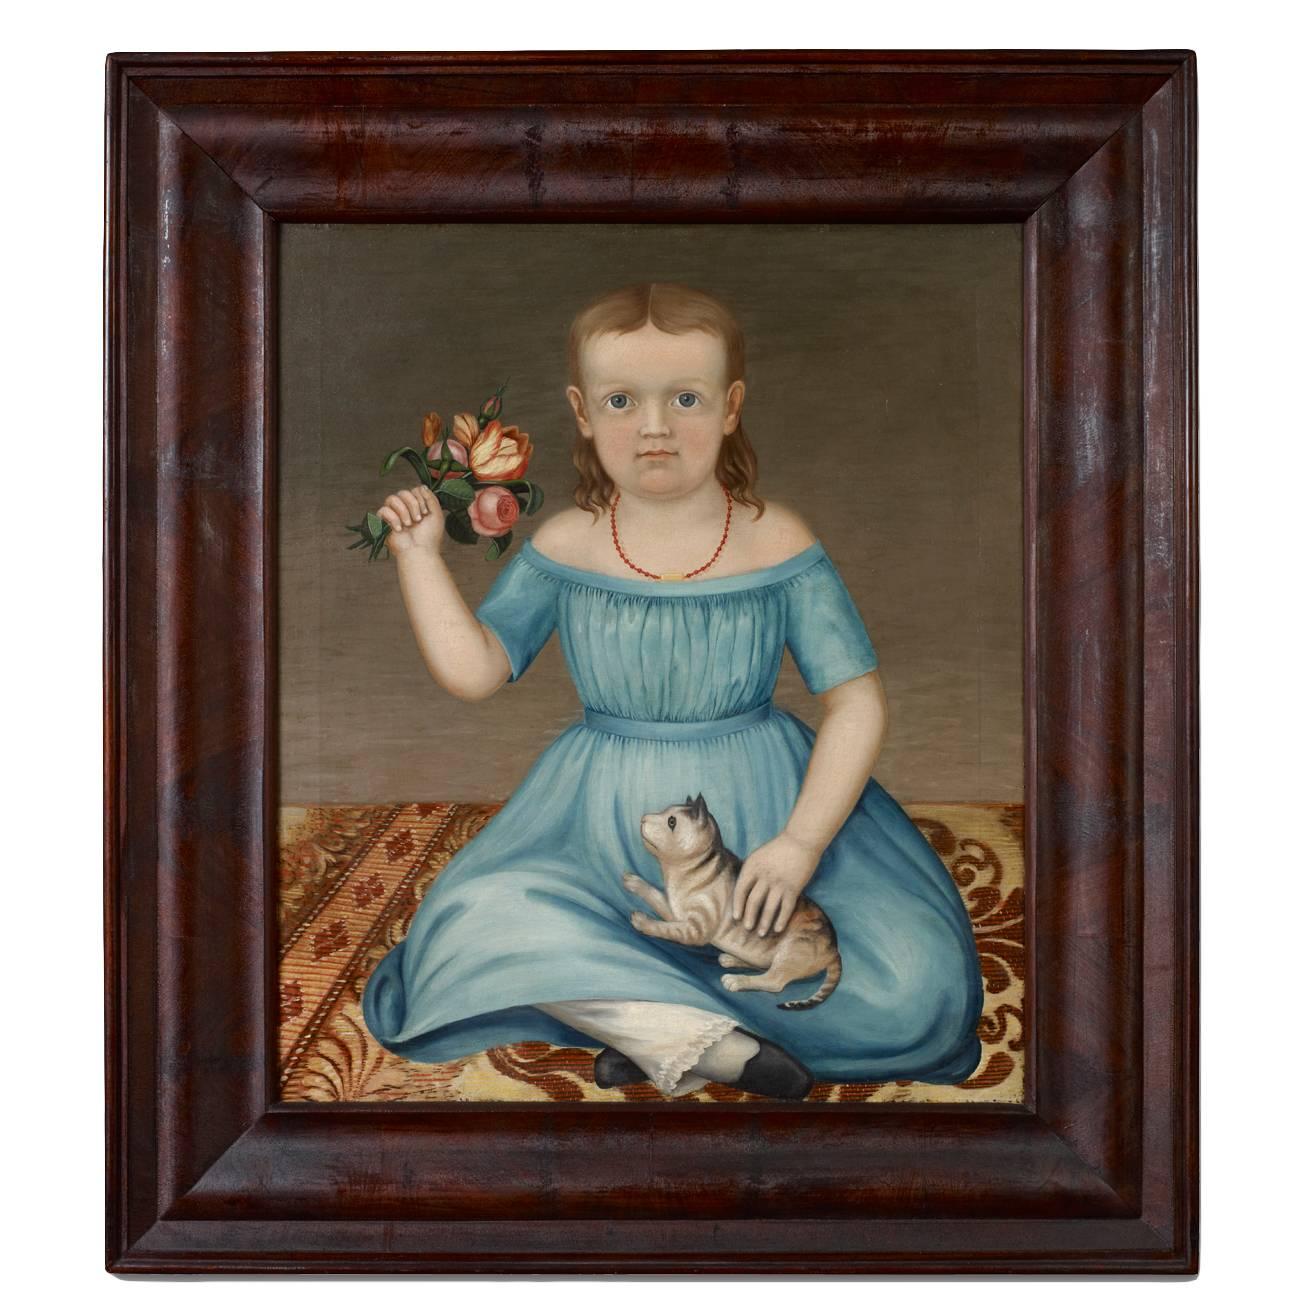 Artist Unidentified American, Probably New York, circa 1830-1845 For Sale